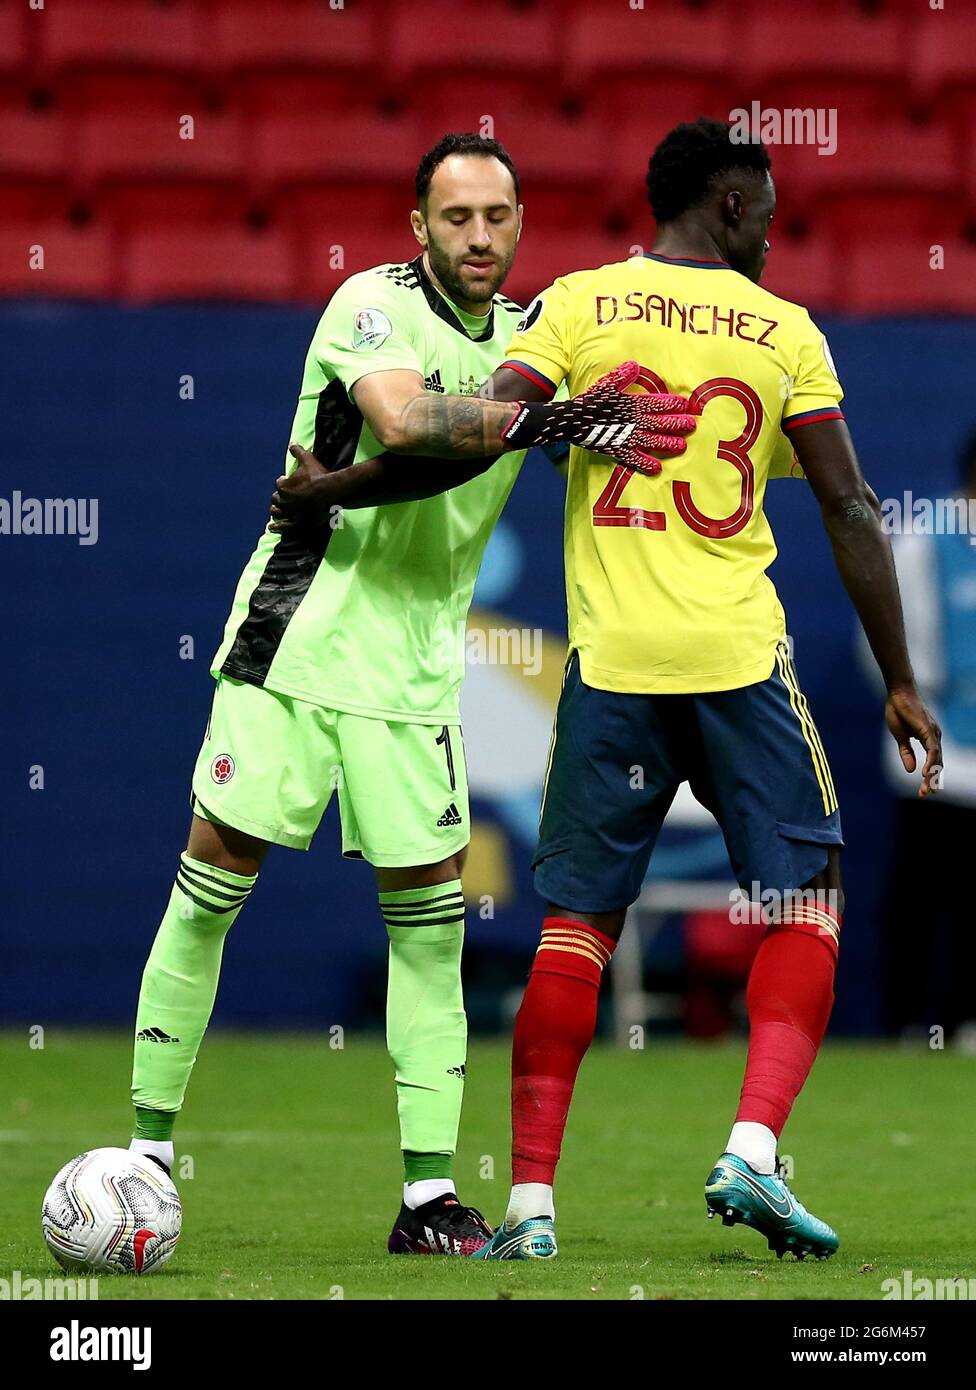 BRASILIA, BRAZIL - JULY 06: Davinson Sanchez with David Ospina Goalkeeper of Colombia after miss his penalty during a penalty shootout ,after a the Semifinal match between Argentina and Colombia as part of Conmebol Copa America Brazil 2021 at Mane Garrincha Stadium on July 6, 2021 in Brasilia, Brazil. (MB Media) Stock Photo